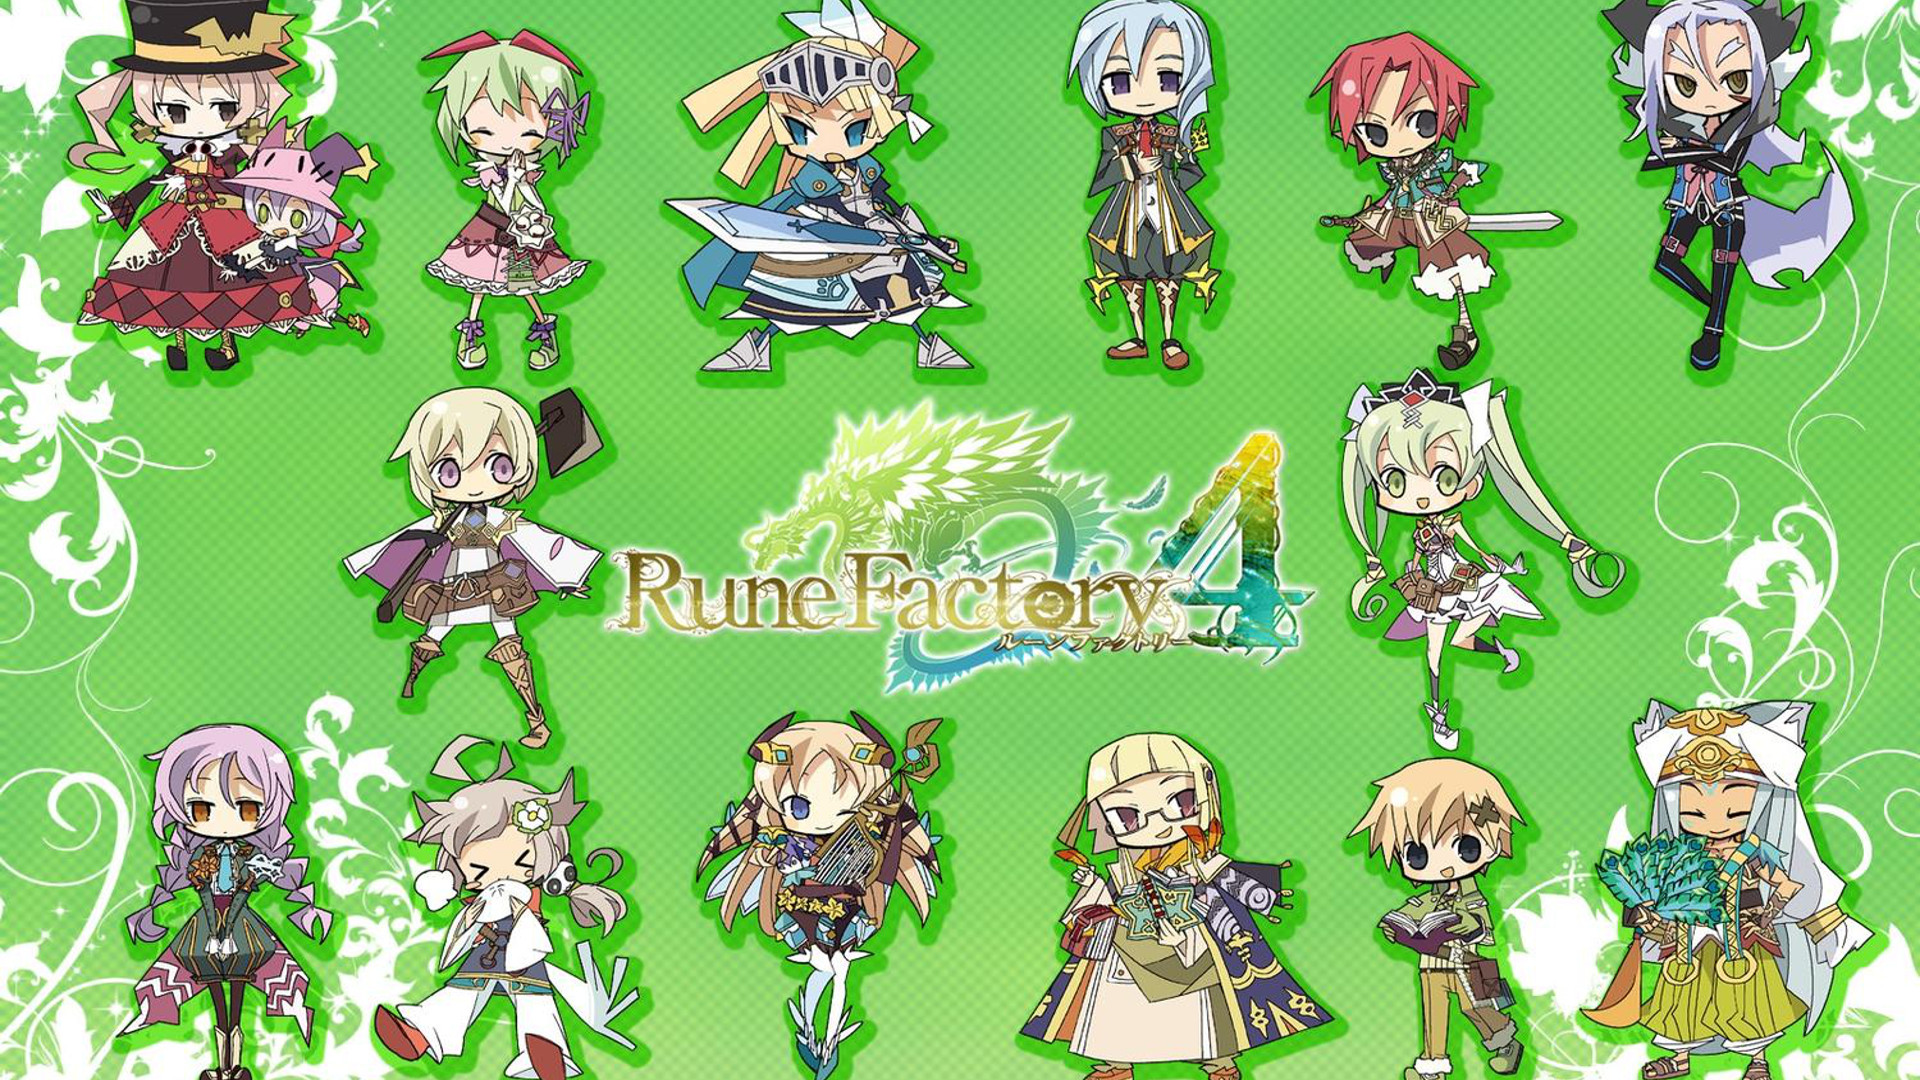 Video Game Rune Factory 4 HD Wallpaper | Background Image